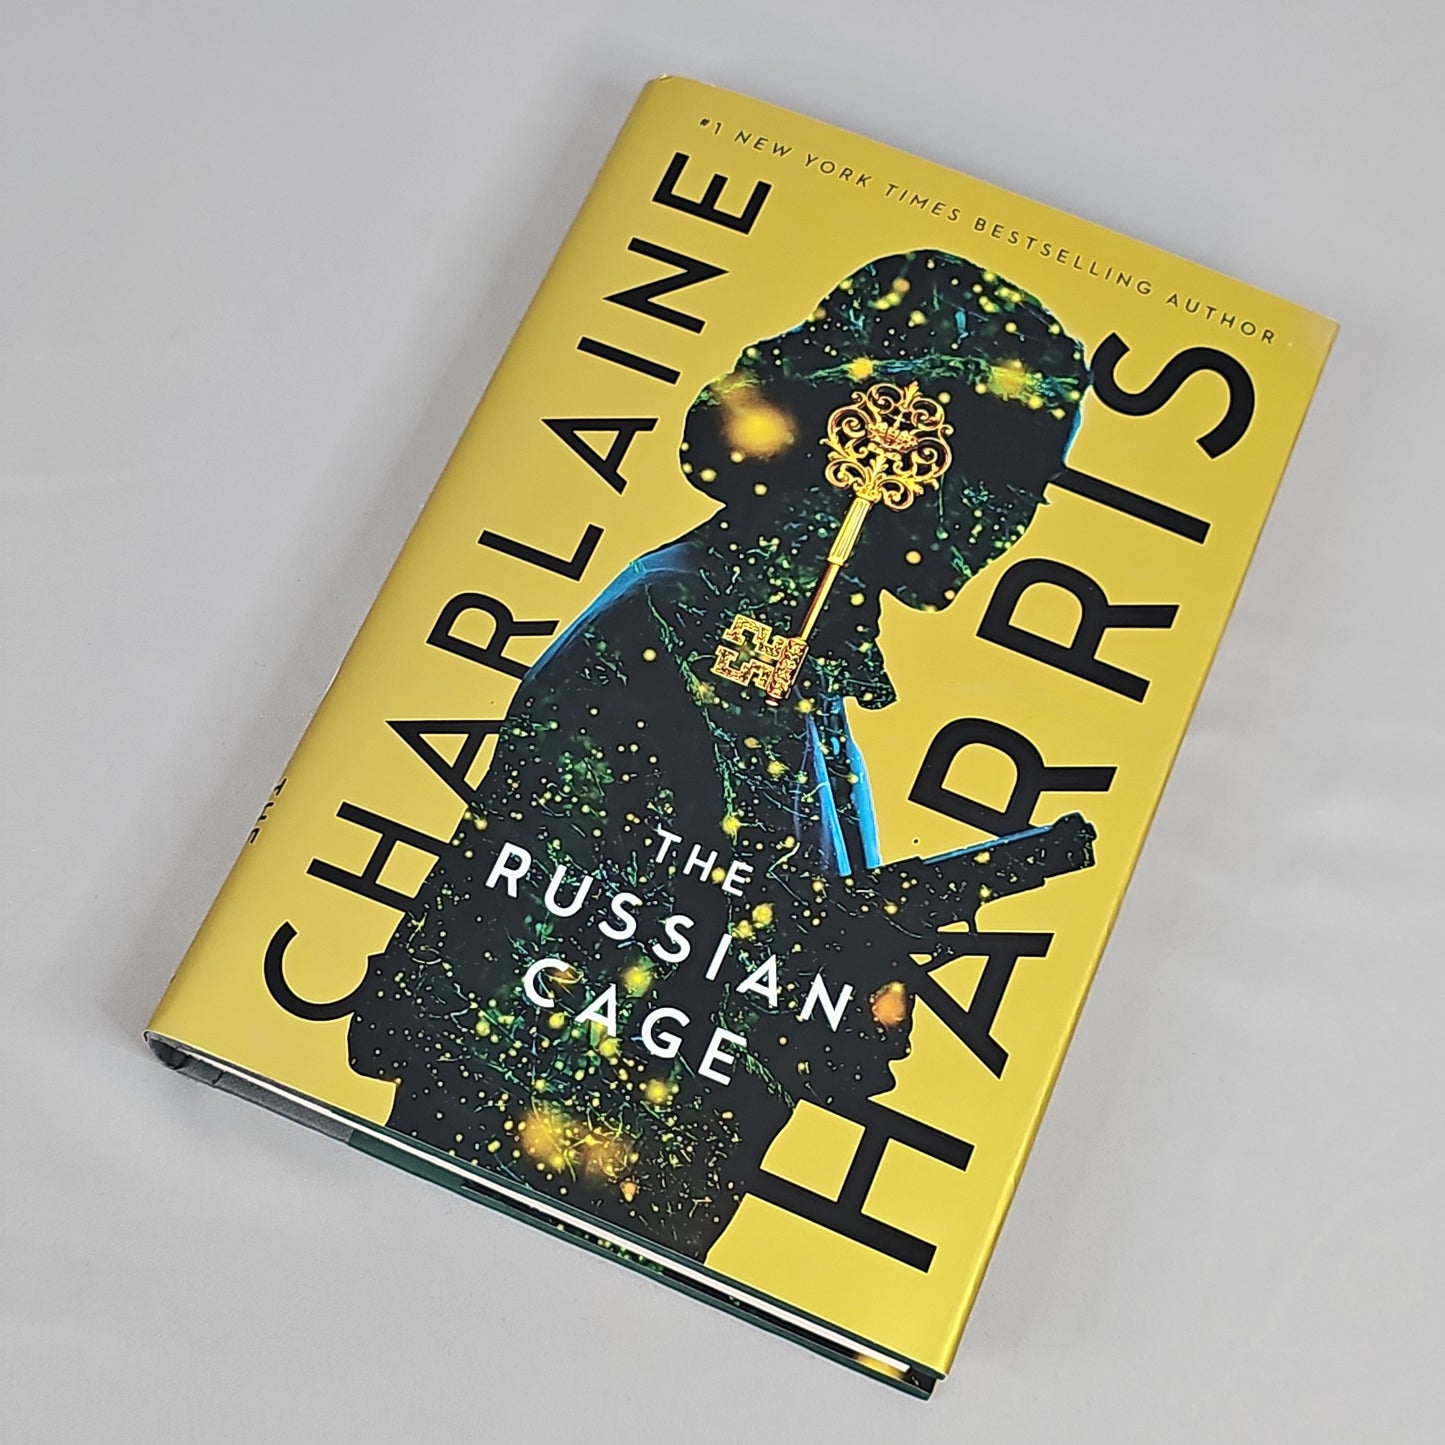 THE RUSSIAN CAGE by Charlaine Harris Book Hardback (New)